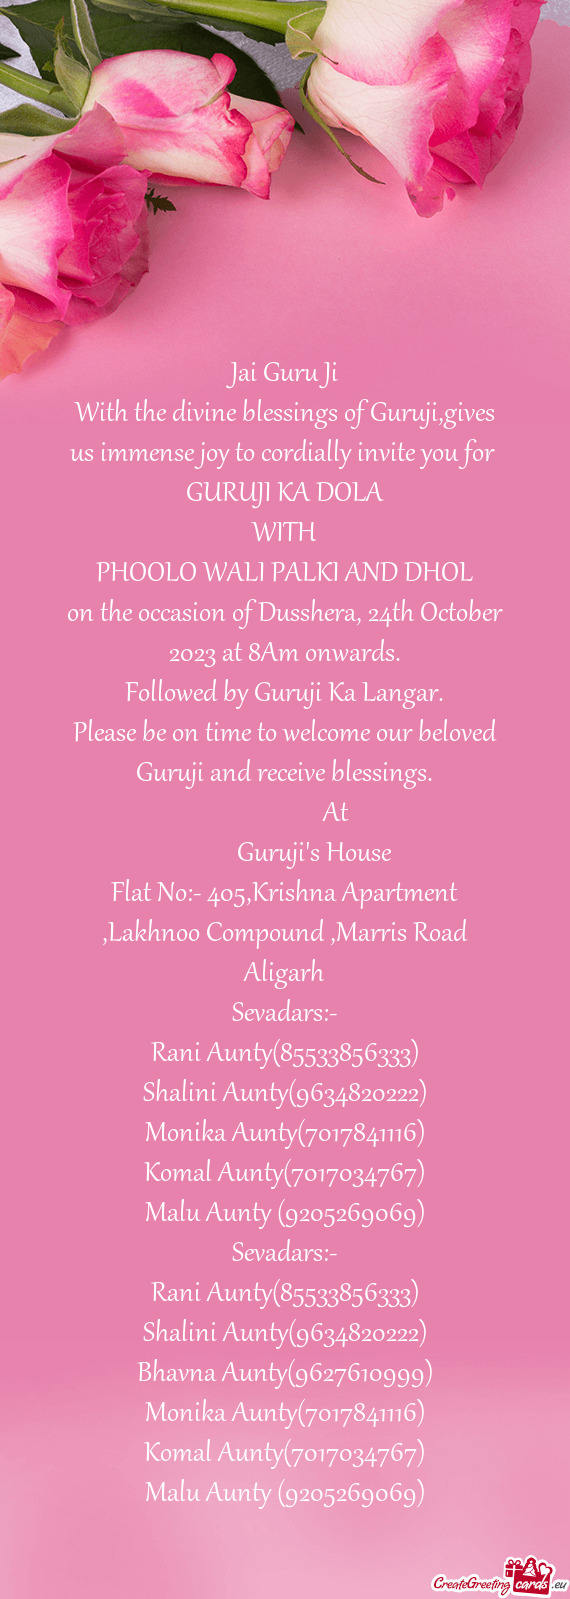 Please be on time to welcome our beloved Guruji and receive blessings